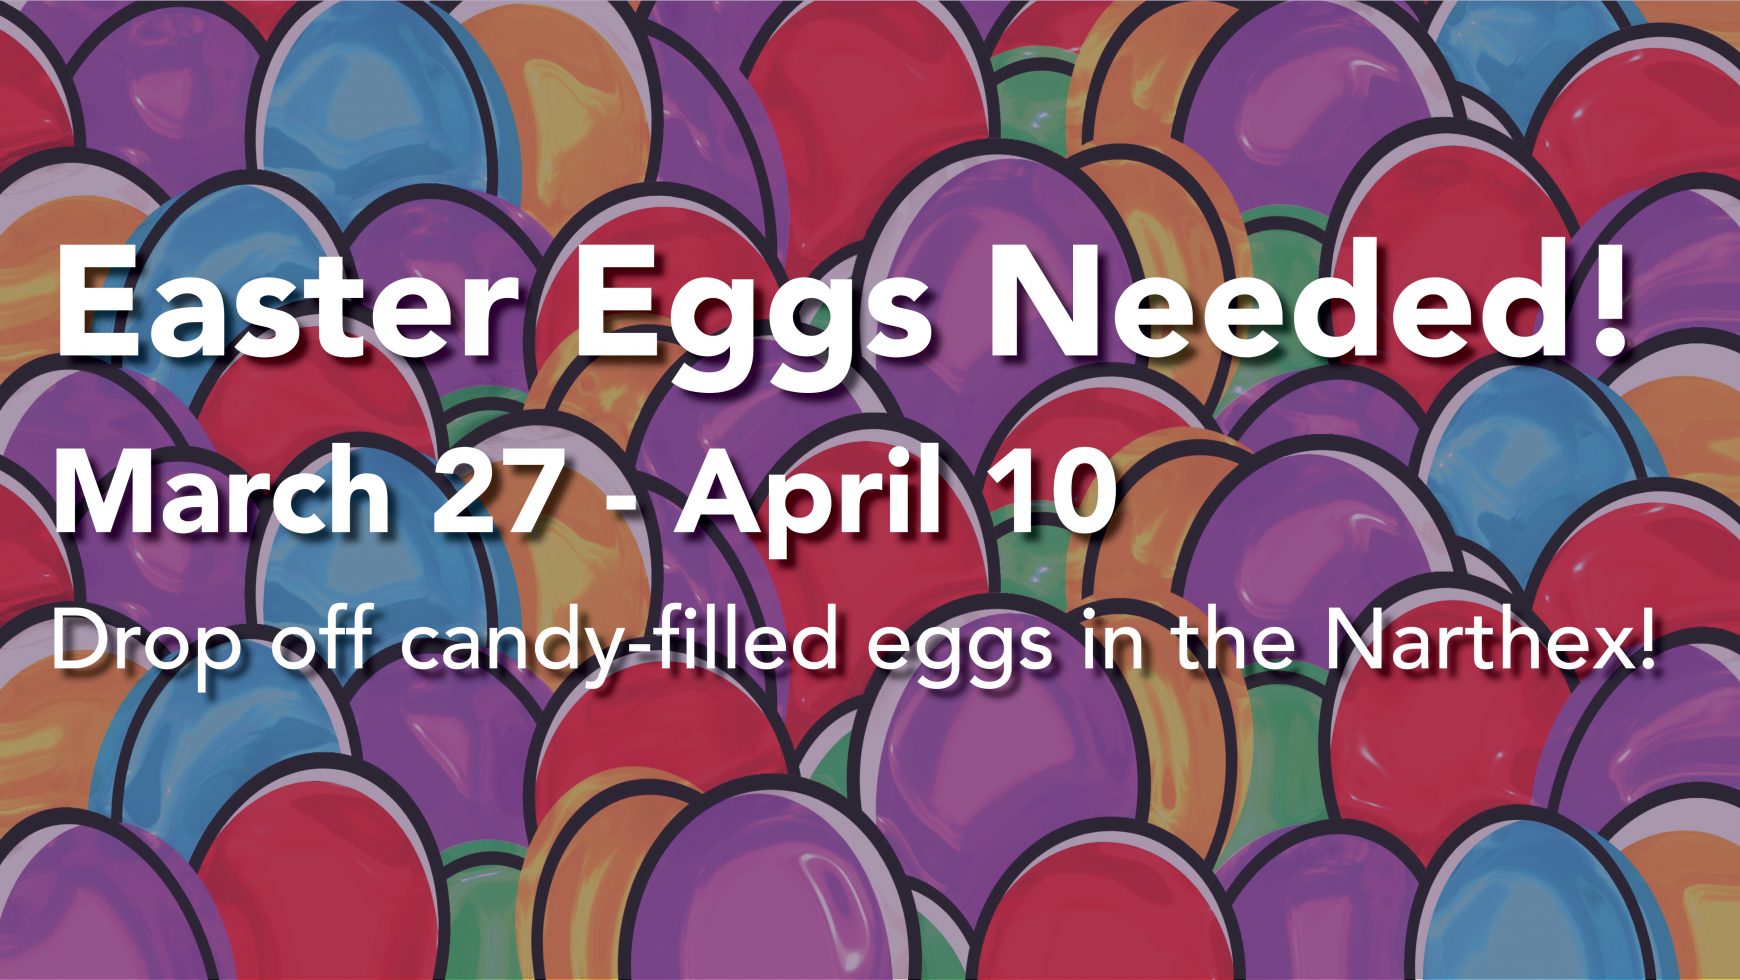 We Need Eggs for Our Easter Egg Hunt!